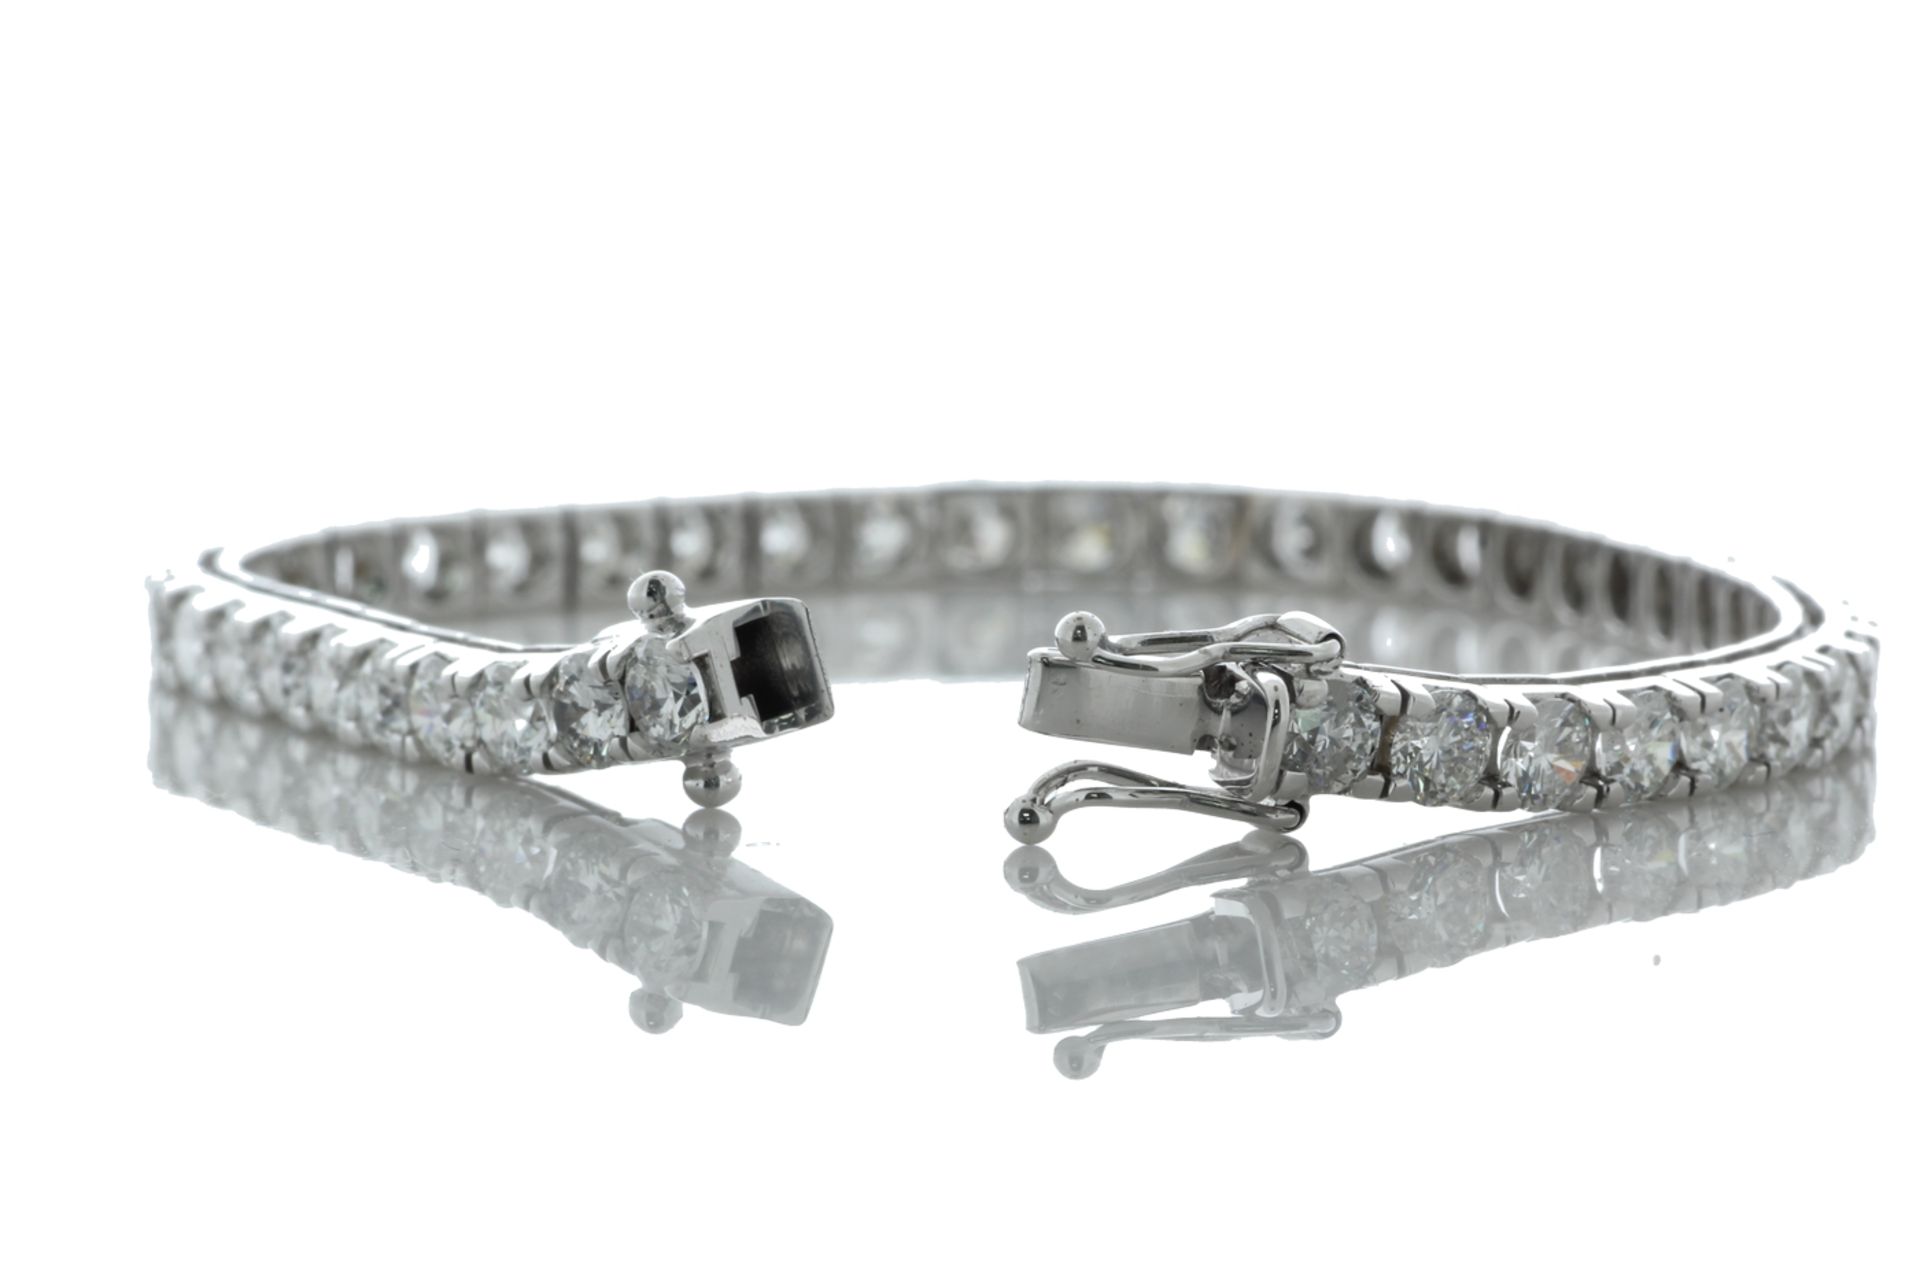 18ct White Gold Tennis Diamond Bracelet 9.05 Carats - Valued by AGI £28,950.00 - 18ct White Gold - Image 3 of 3